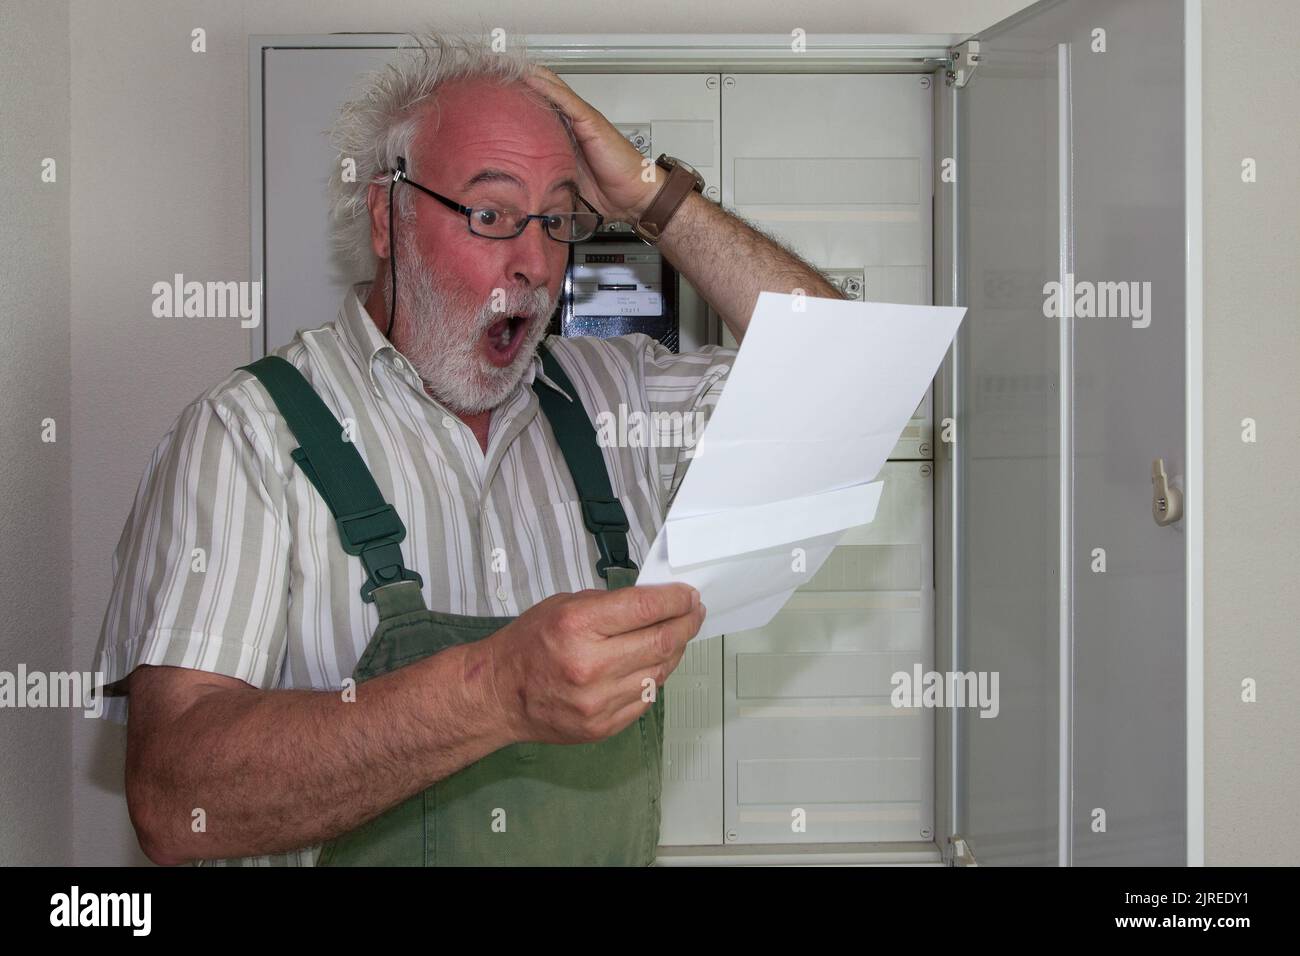 The older man's blood rushes to his head and he tears his hair as he looks at his new electric bill. It will make a dent in the wallets of many consum Stock Photo